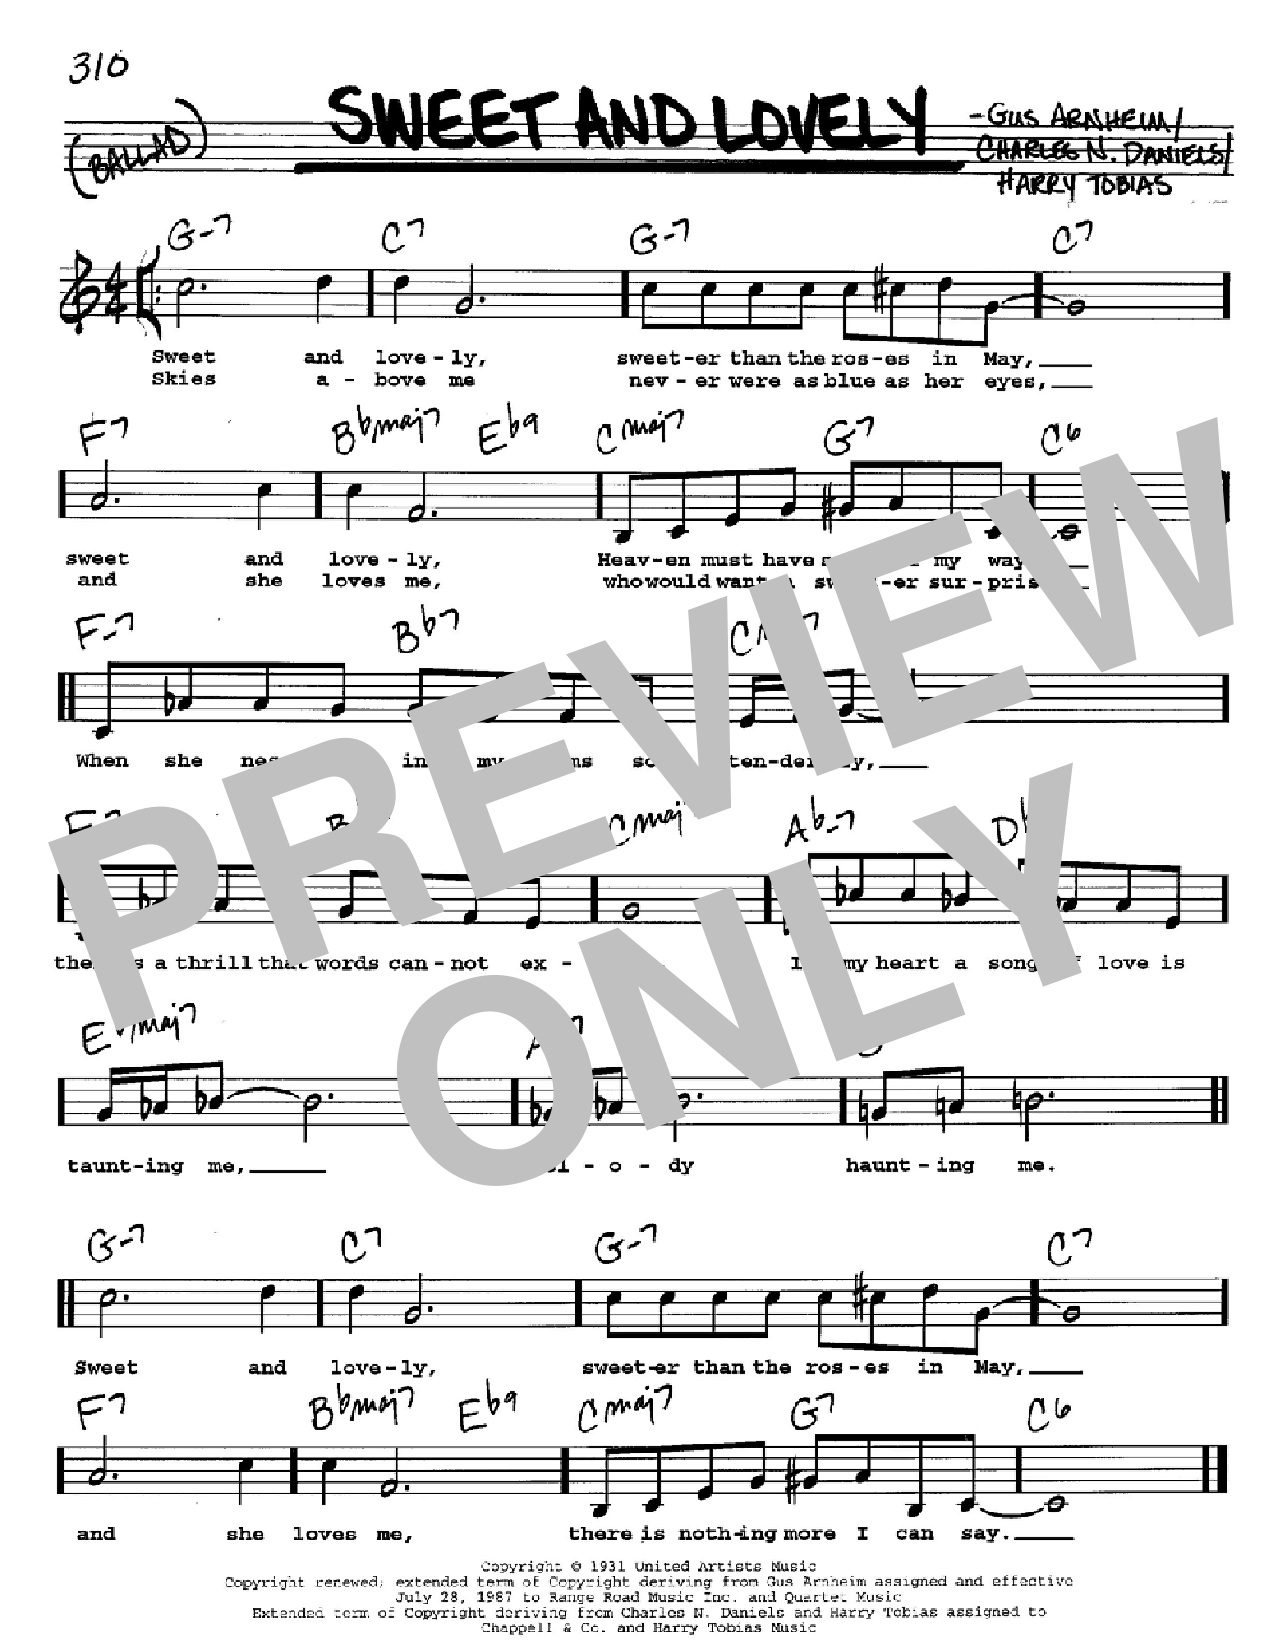 Download Gus Arnheim Sweet And Lovely Sheet Music